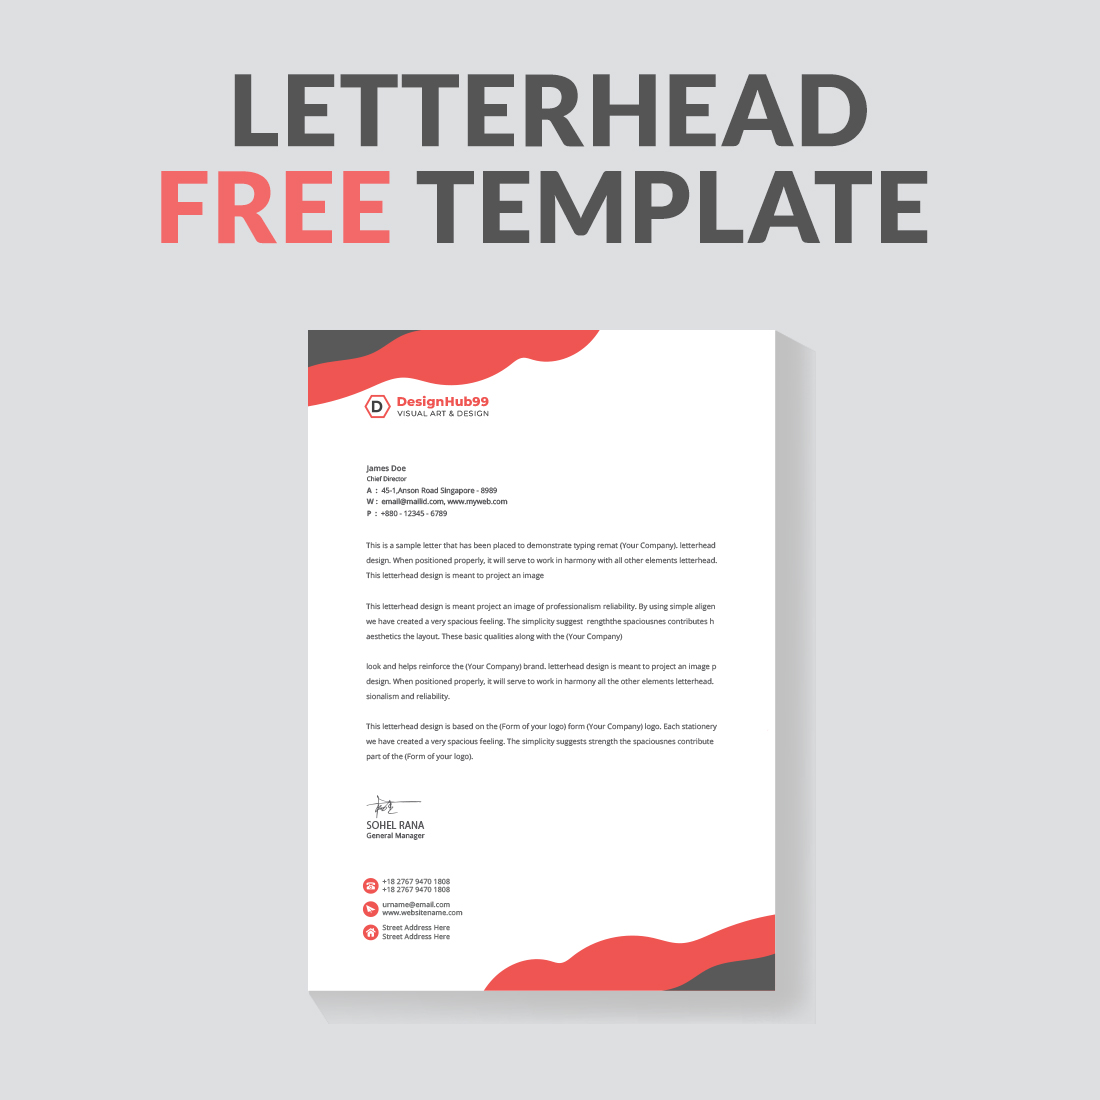 Professional stationery samples